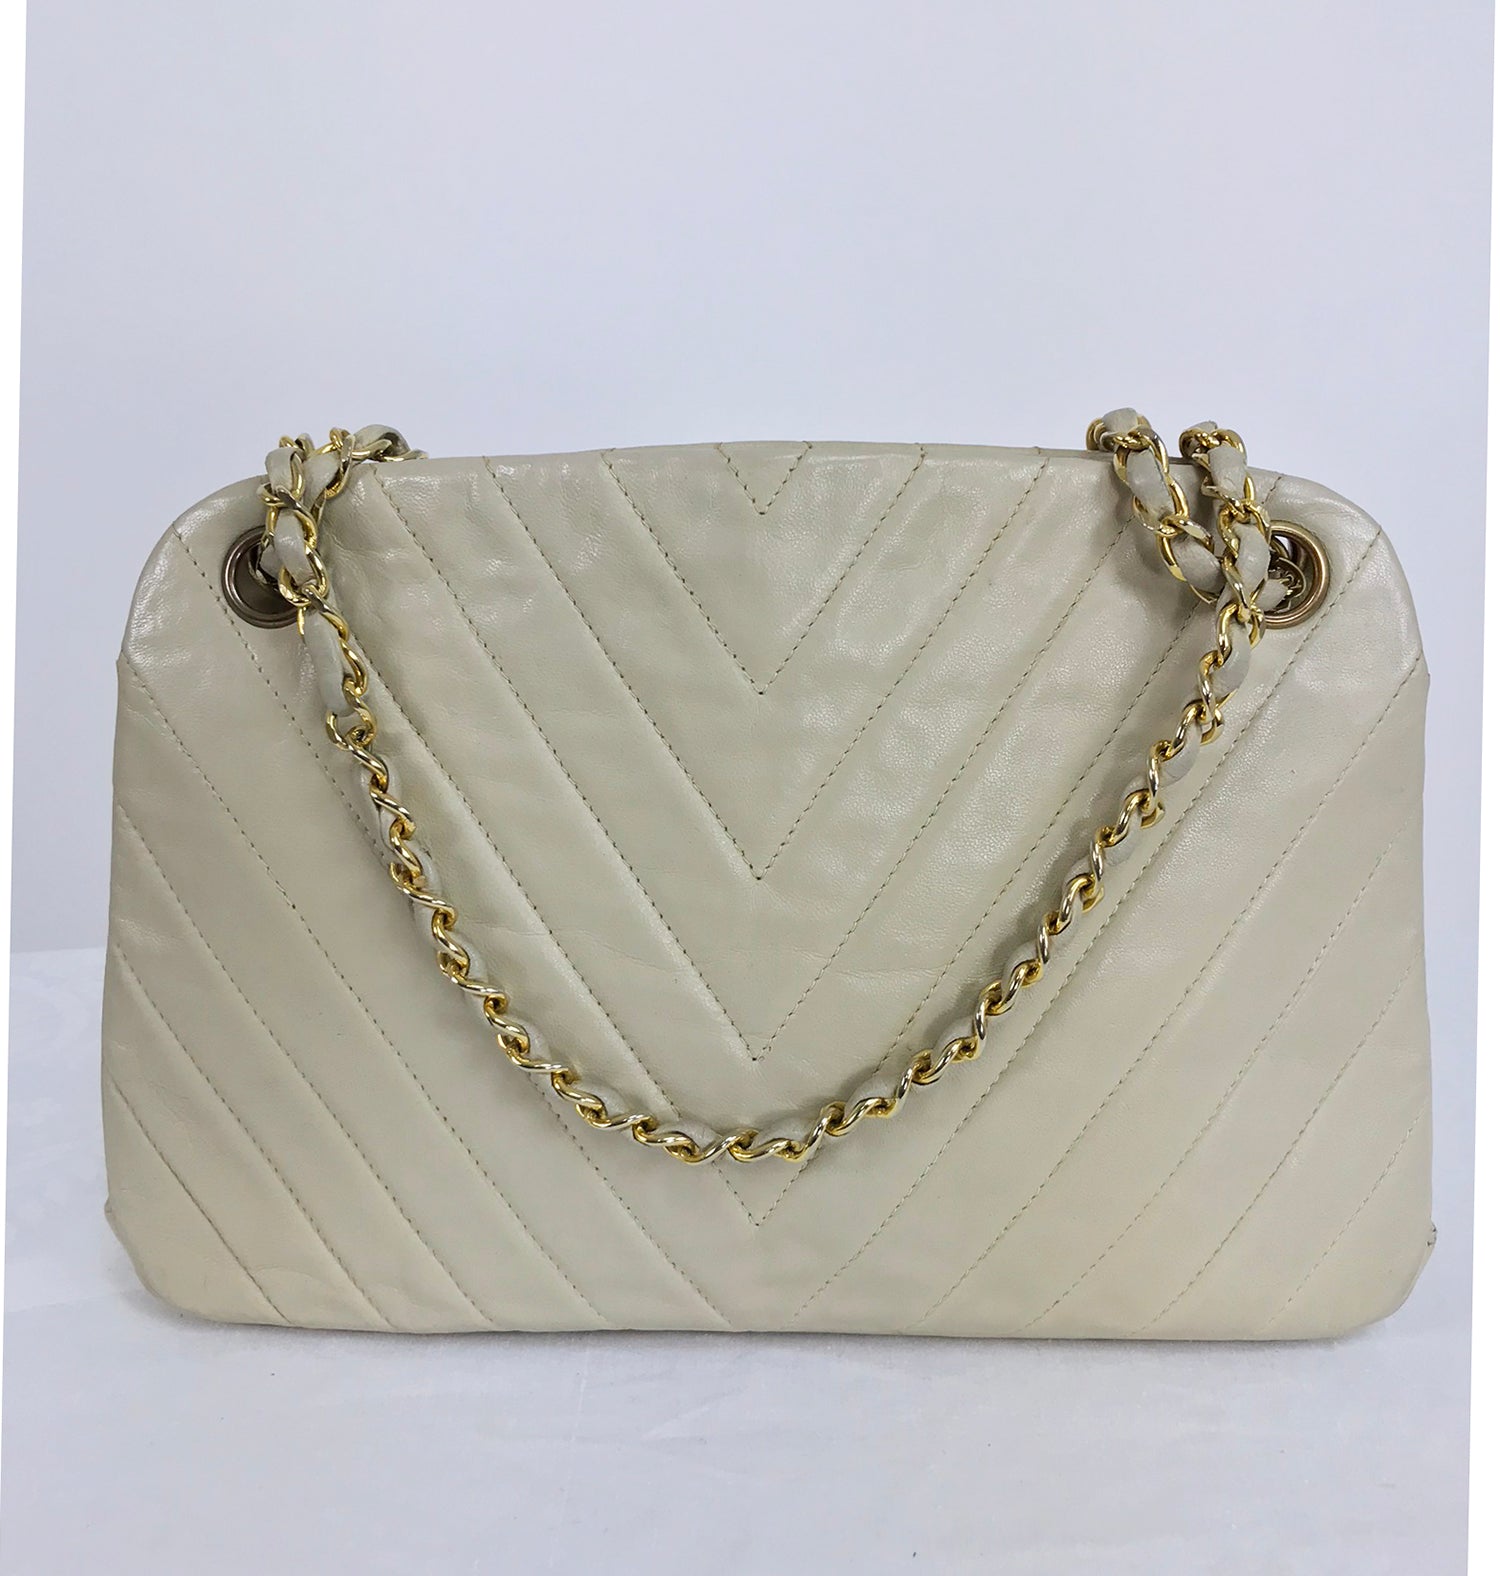 Vintage Chanel Bags 1970S - 3 For Sale on 1stDibs